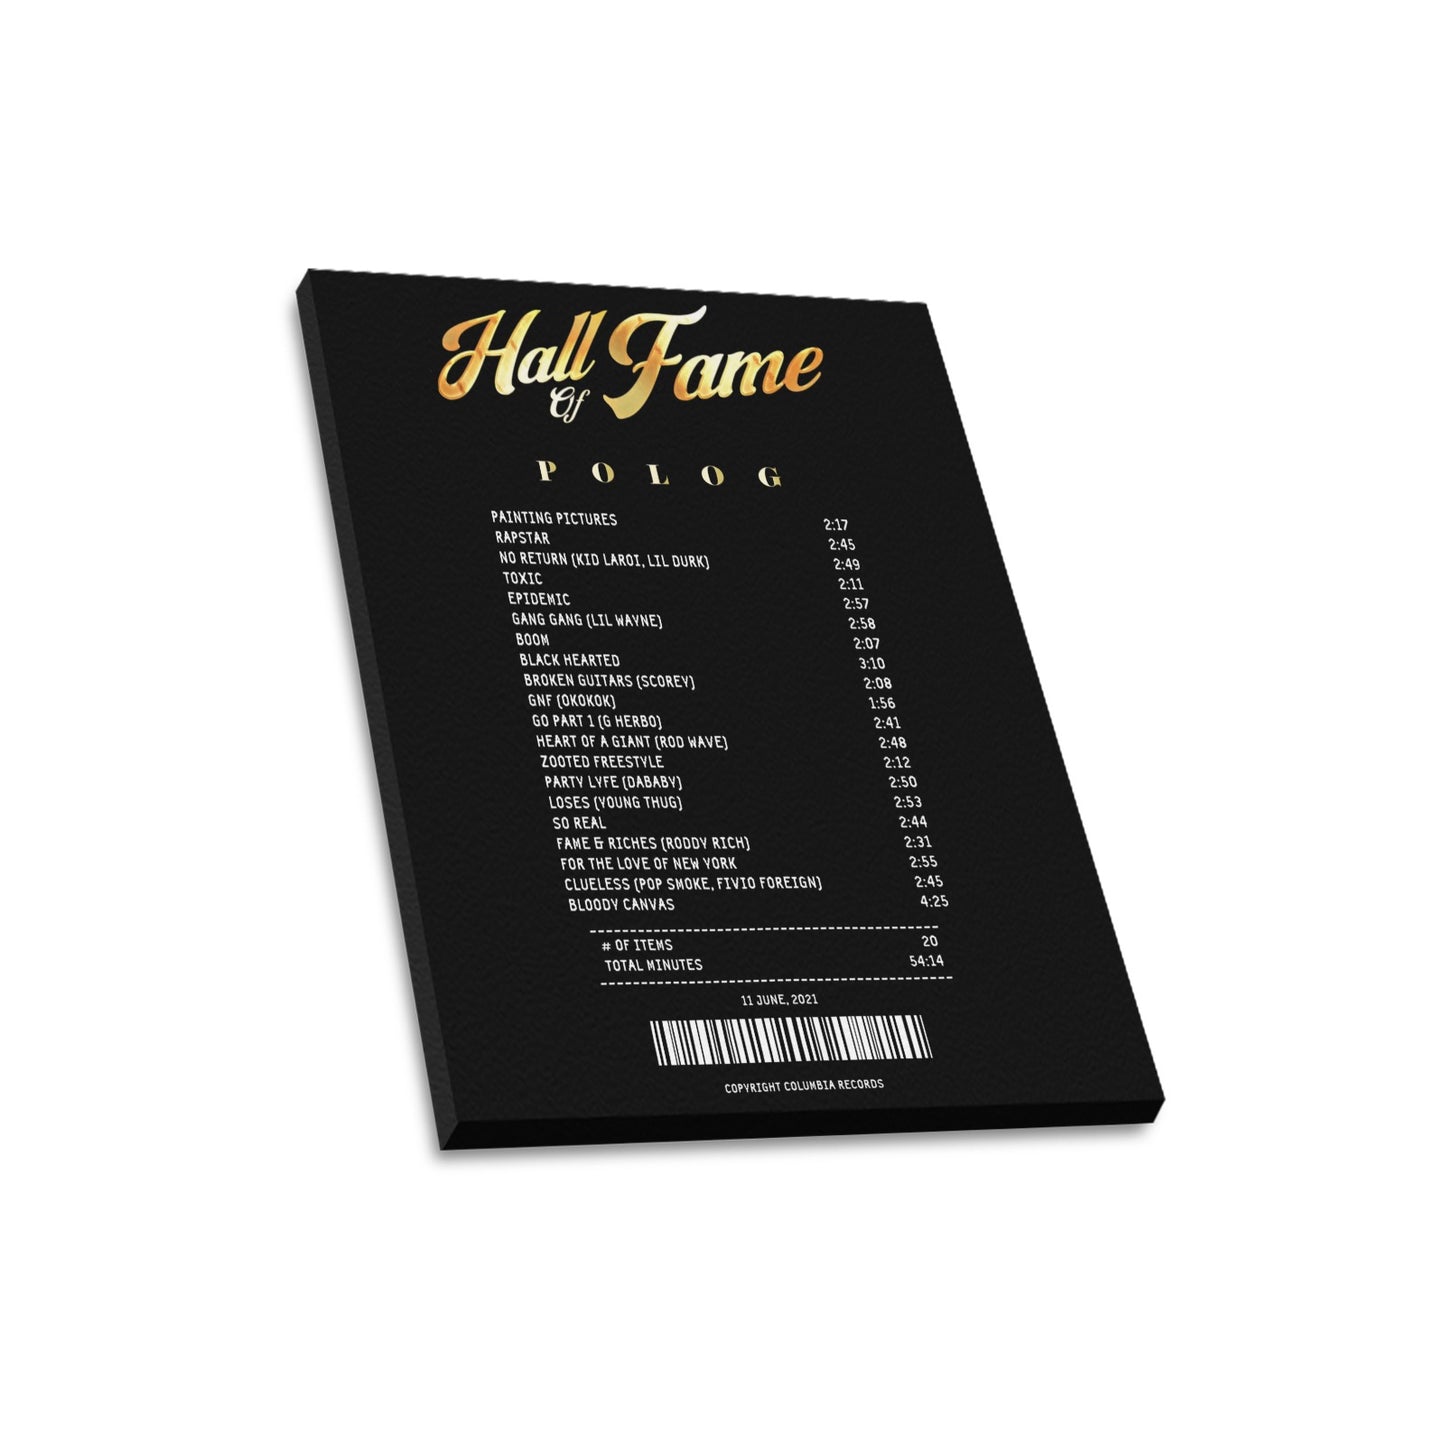 Hall Of Fame - Polo G [Canvas]